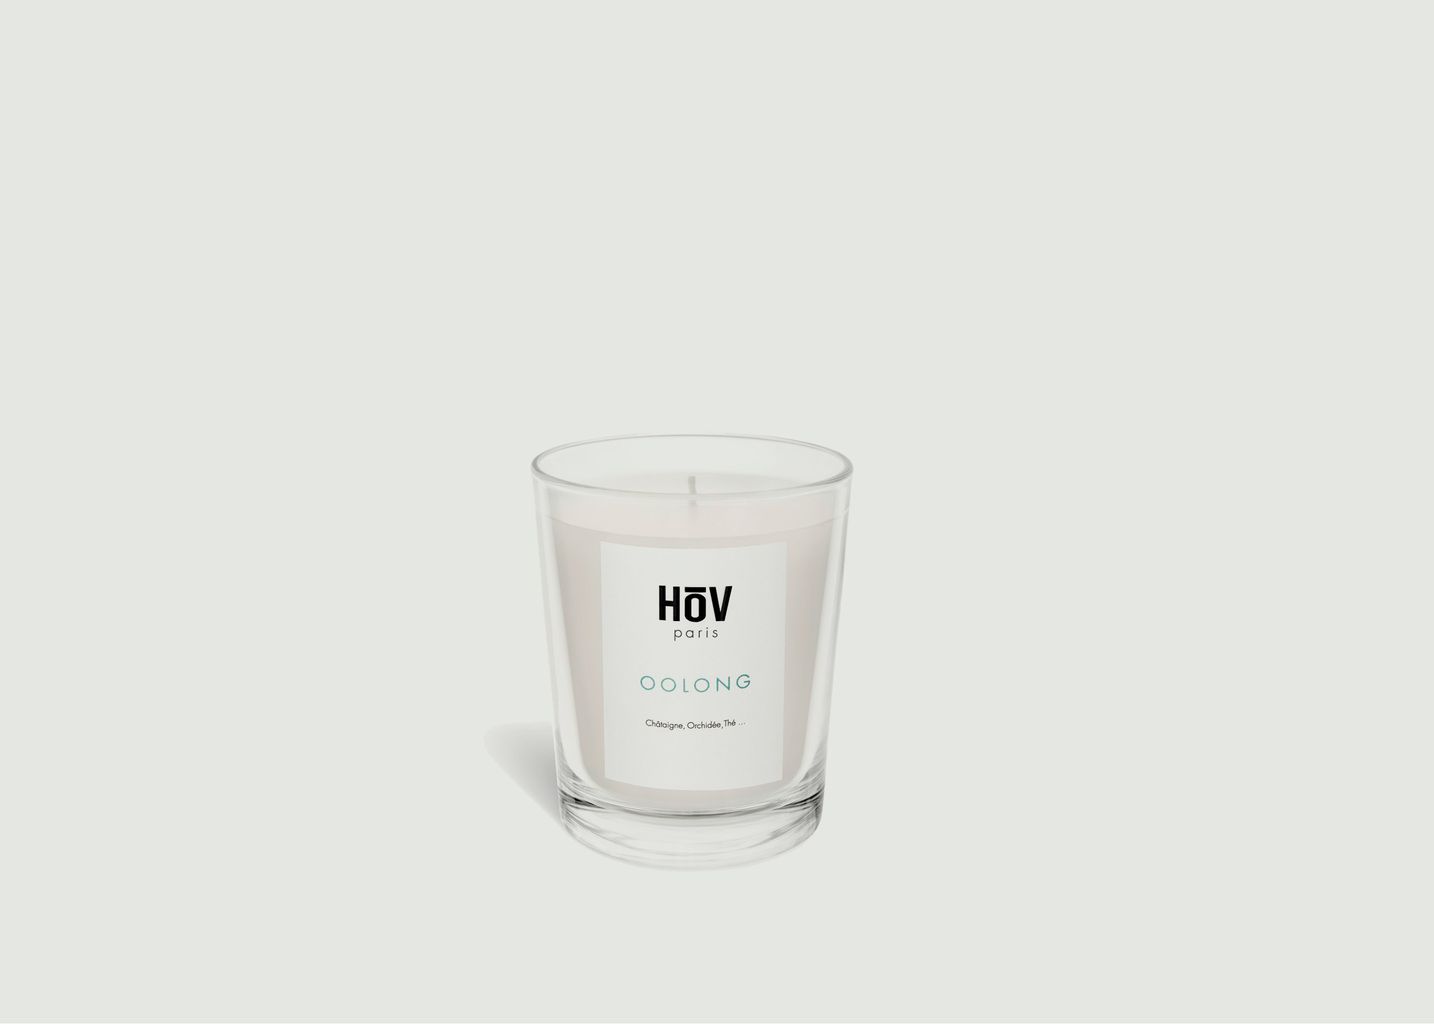 Hо̄v Oolong Candle